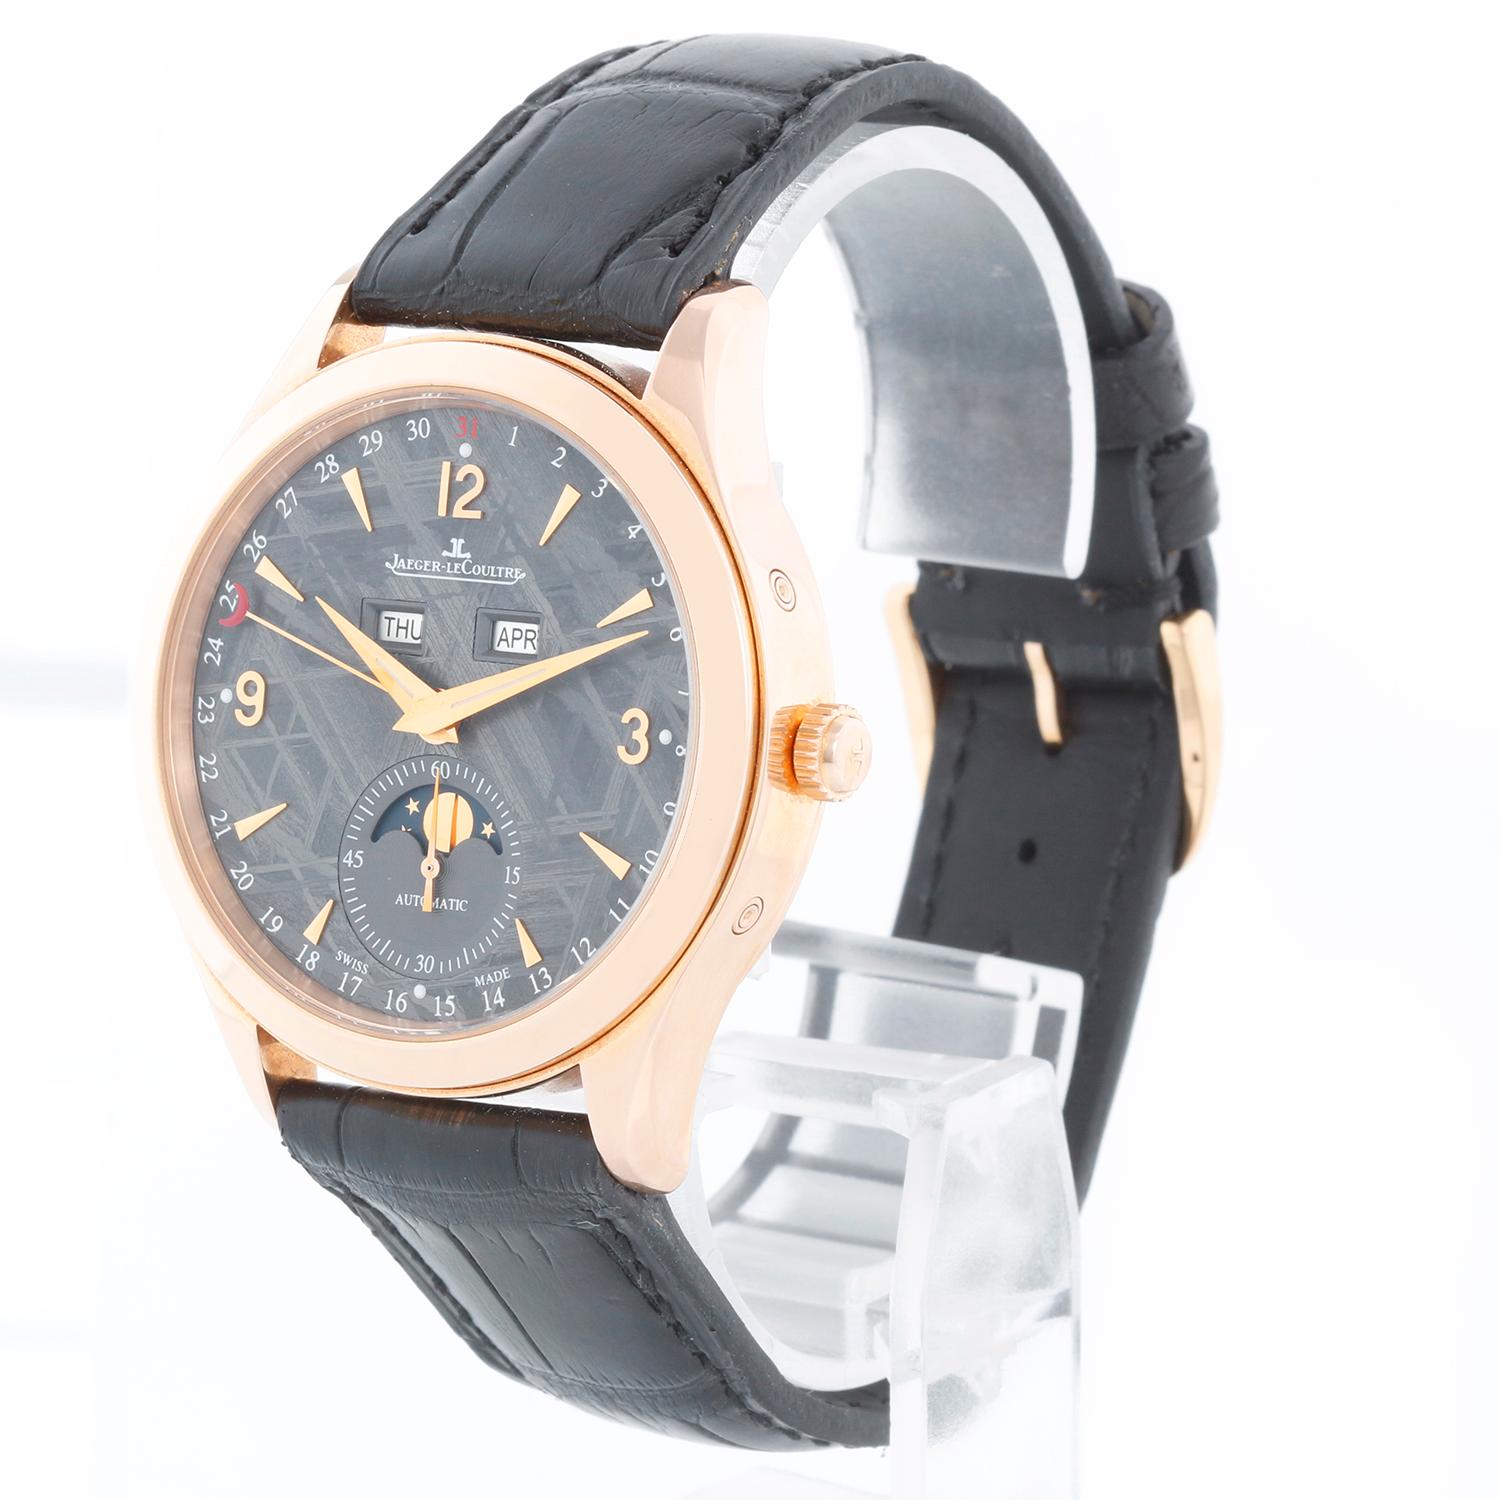 Jaeger-LeCoultre Master Calendar Men's Meteorite Rose Gold  Watch Q1552540 - Automatic winding. Rose Gold  (39mm diameter). Meteorite dial with day and month indicator and date on outer edge of dial. Black leather band with Rose gold 